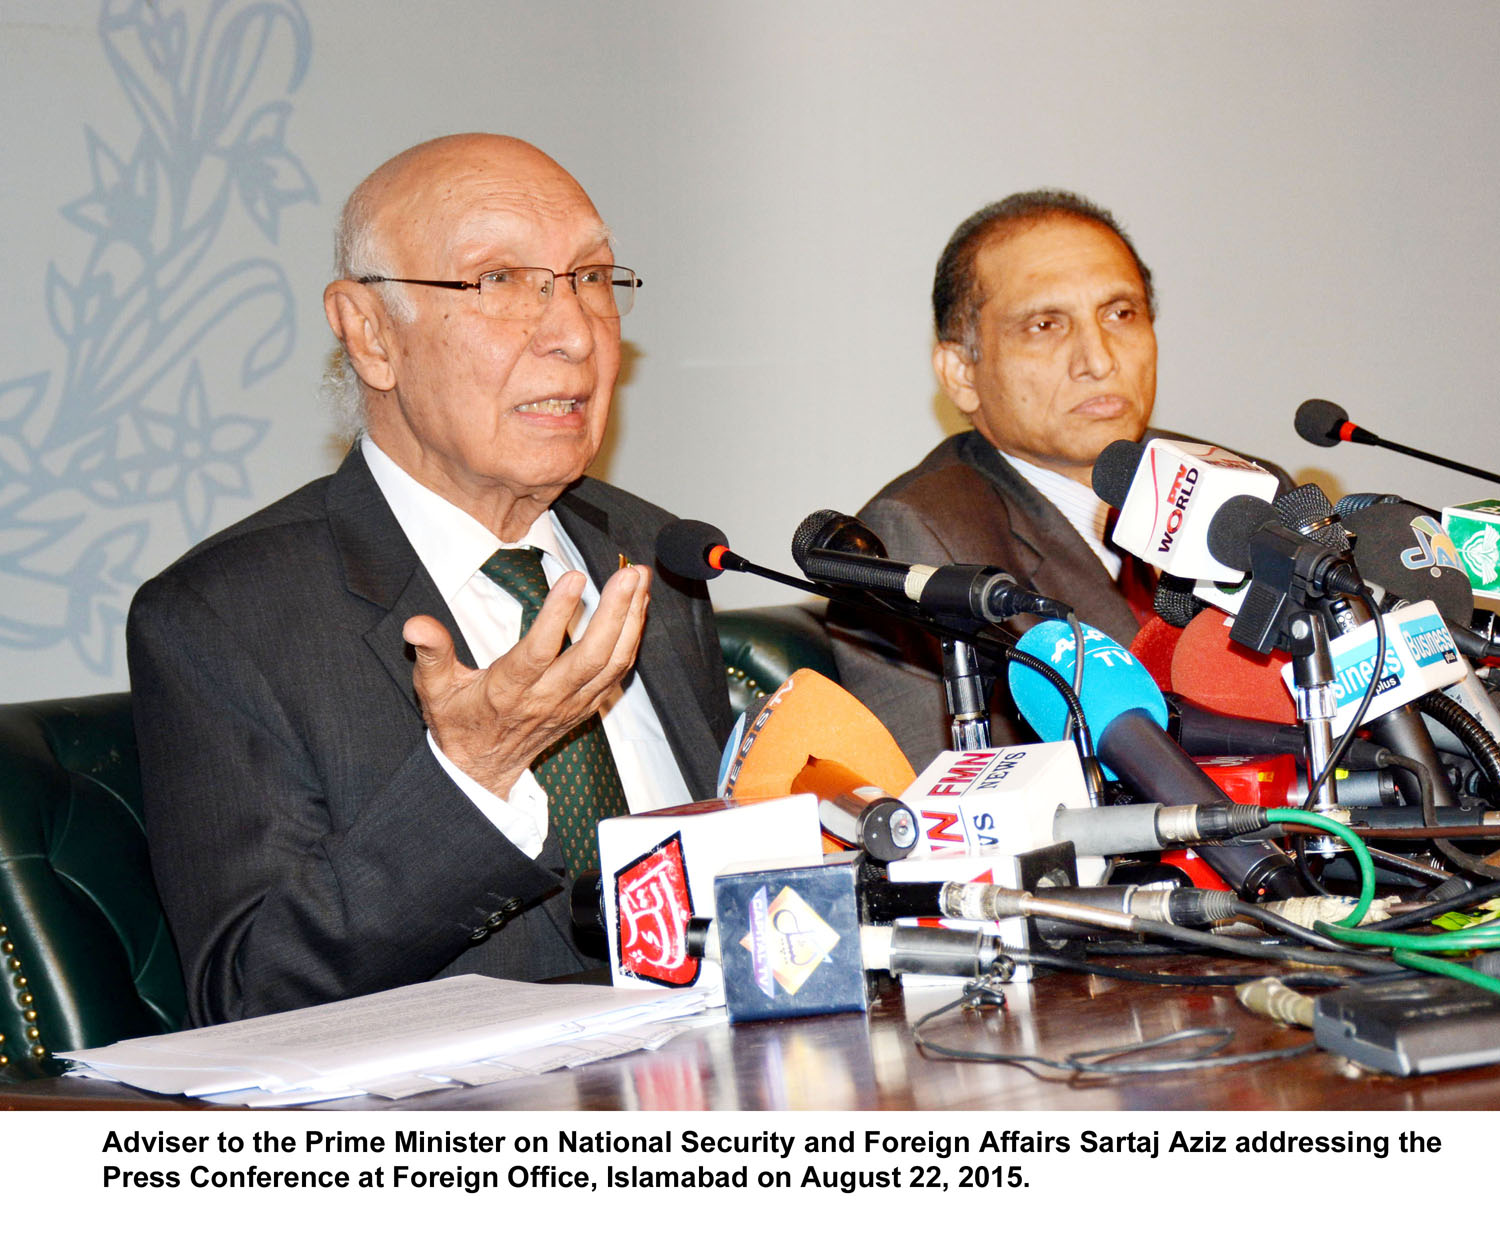 adviser to prime minister on national security and foreign affairs sartaj aziz addresses a press conference at the foreign office in islamabad on august 22 2015 photo pid